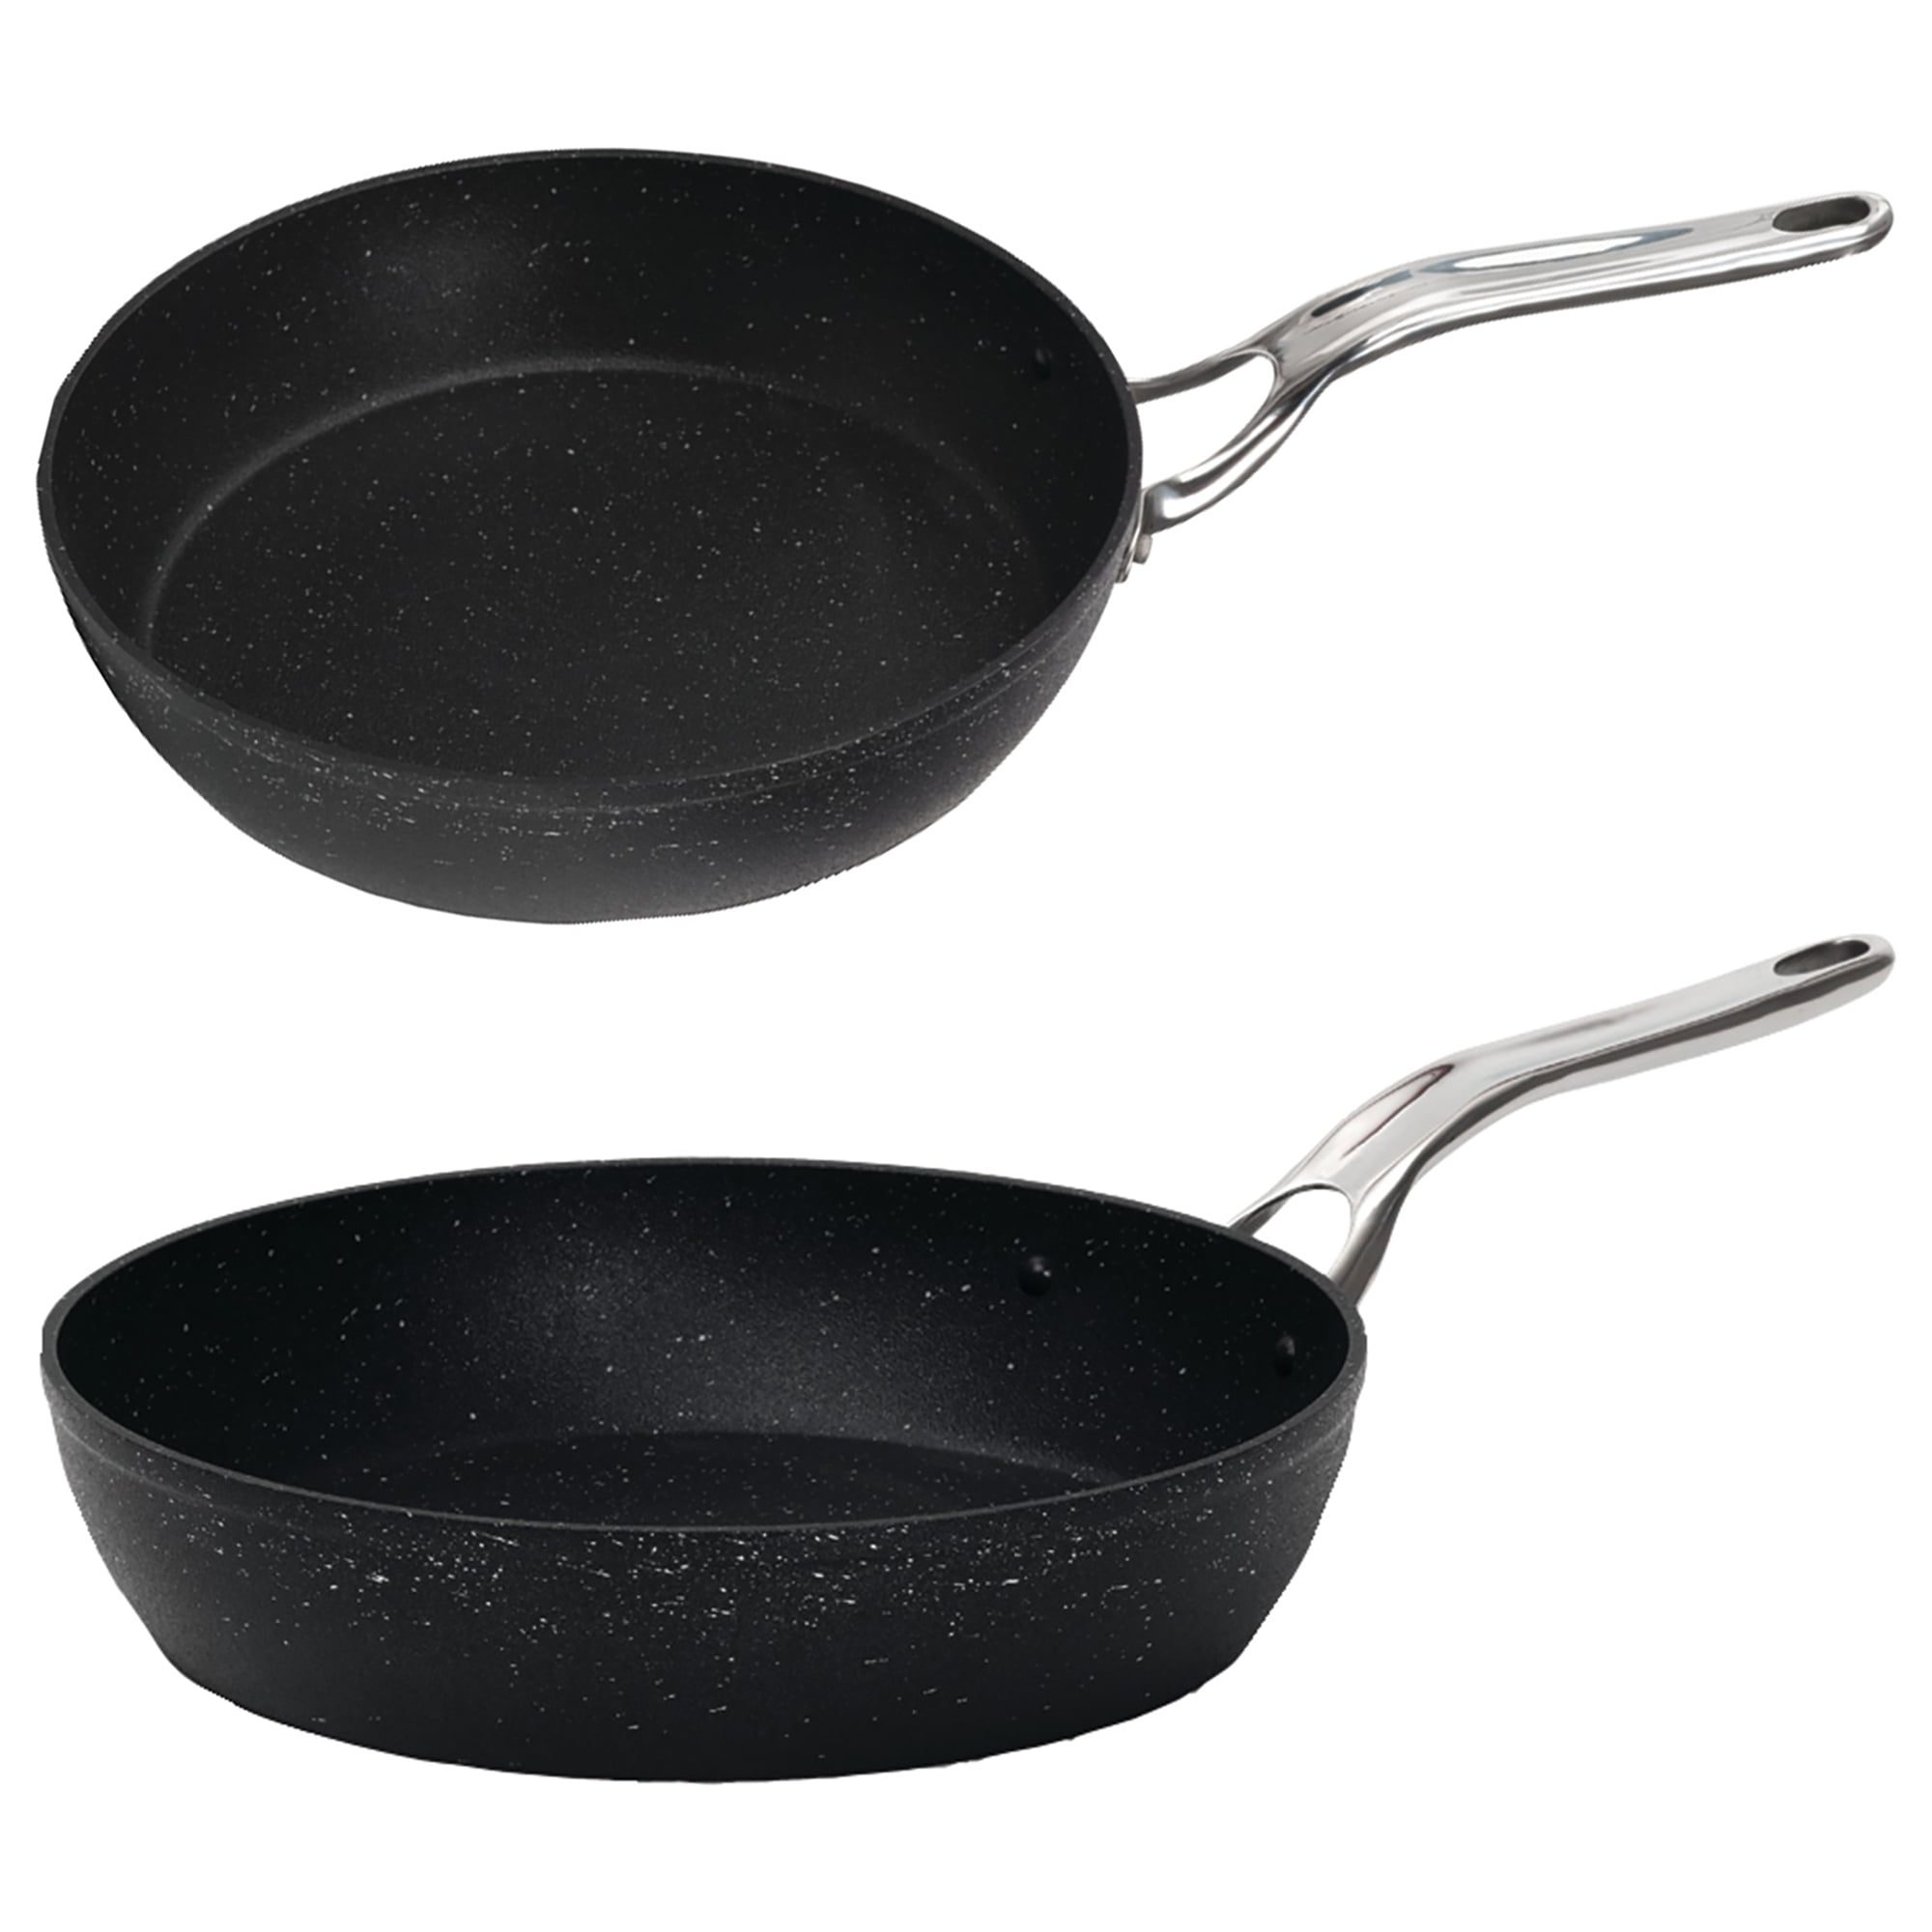 Broyhill 10 Stainless Steel Non-Stick Frying Pan